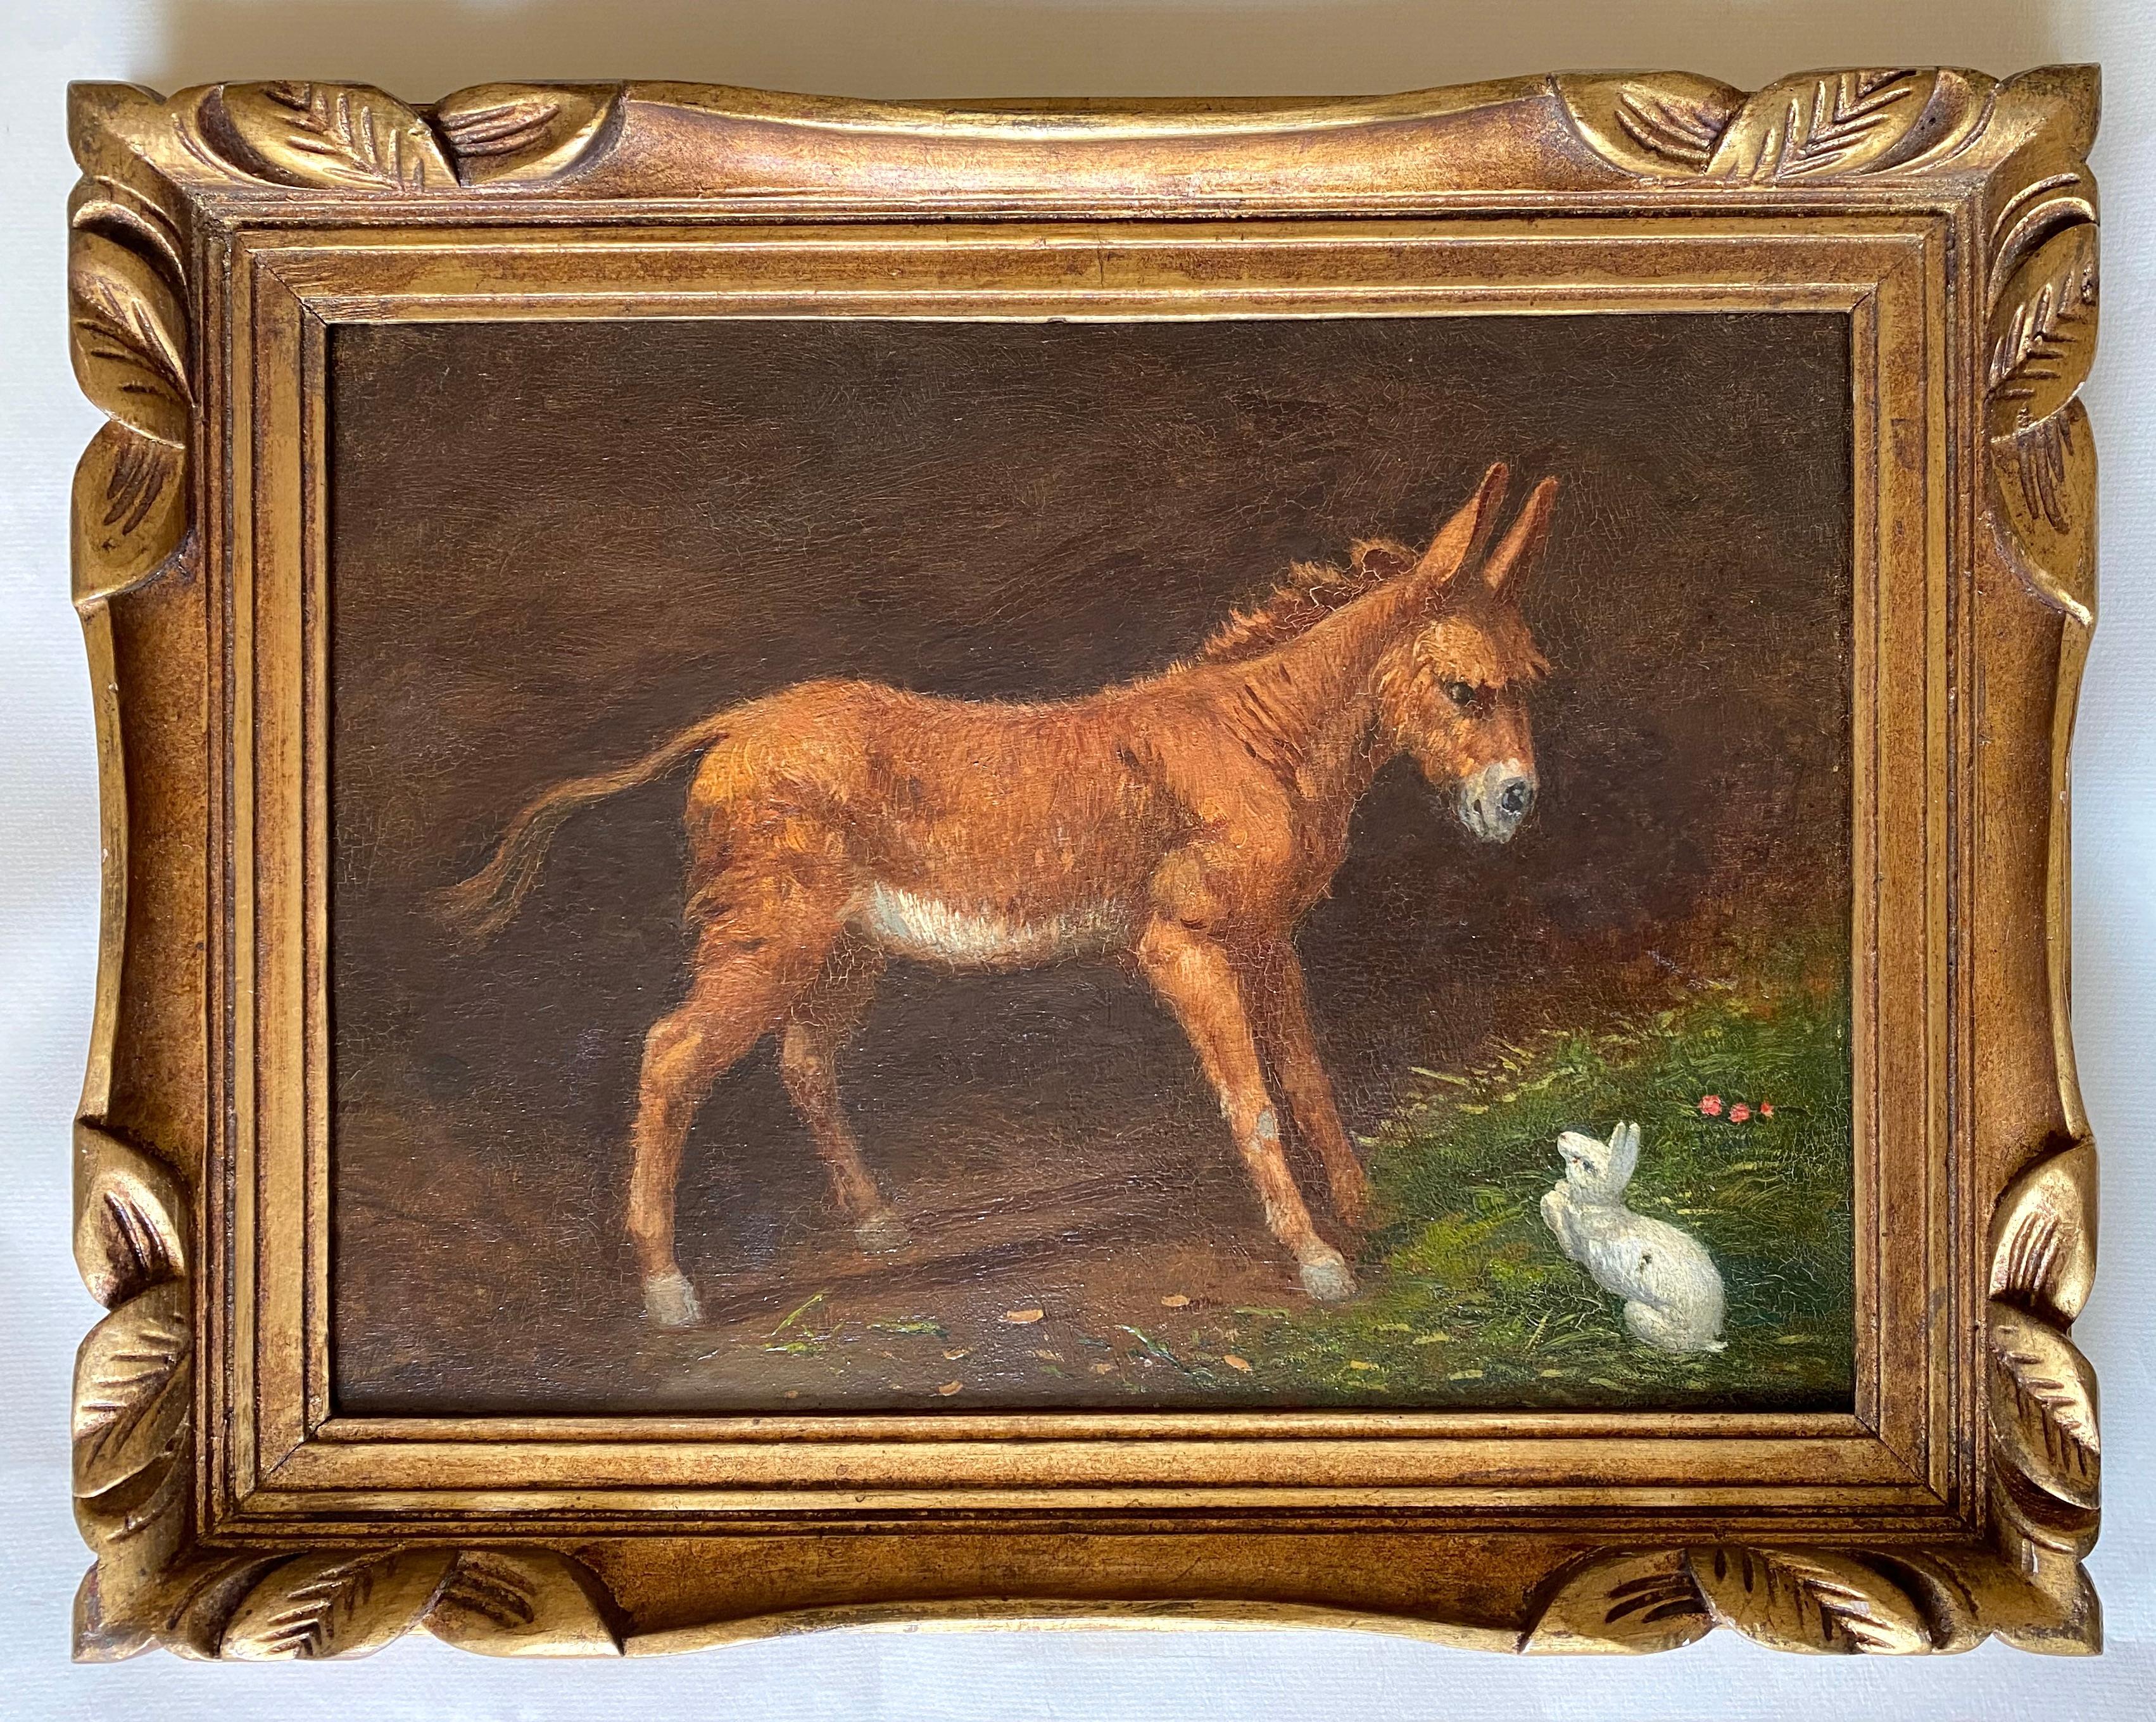 Little Mule and white rabbit: 1890s novecento animal equestrian horse painting - Painting by Gaetano Jerace